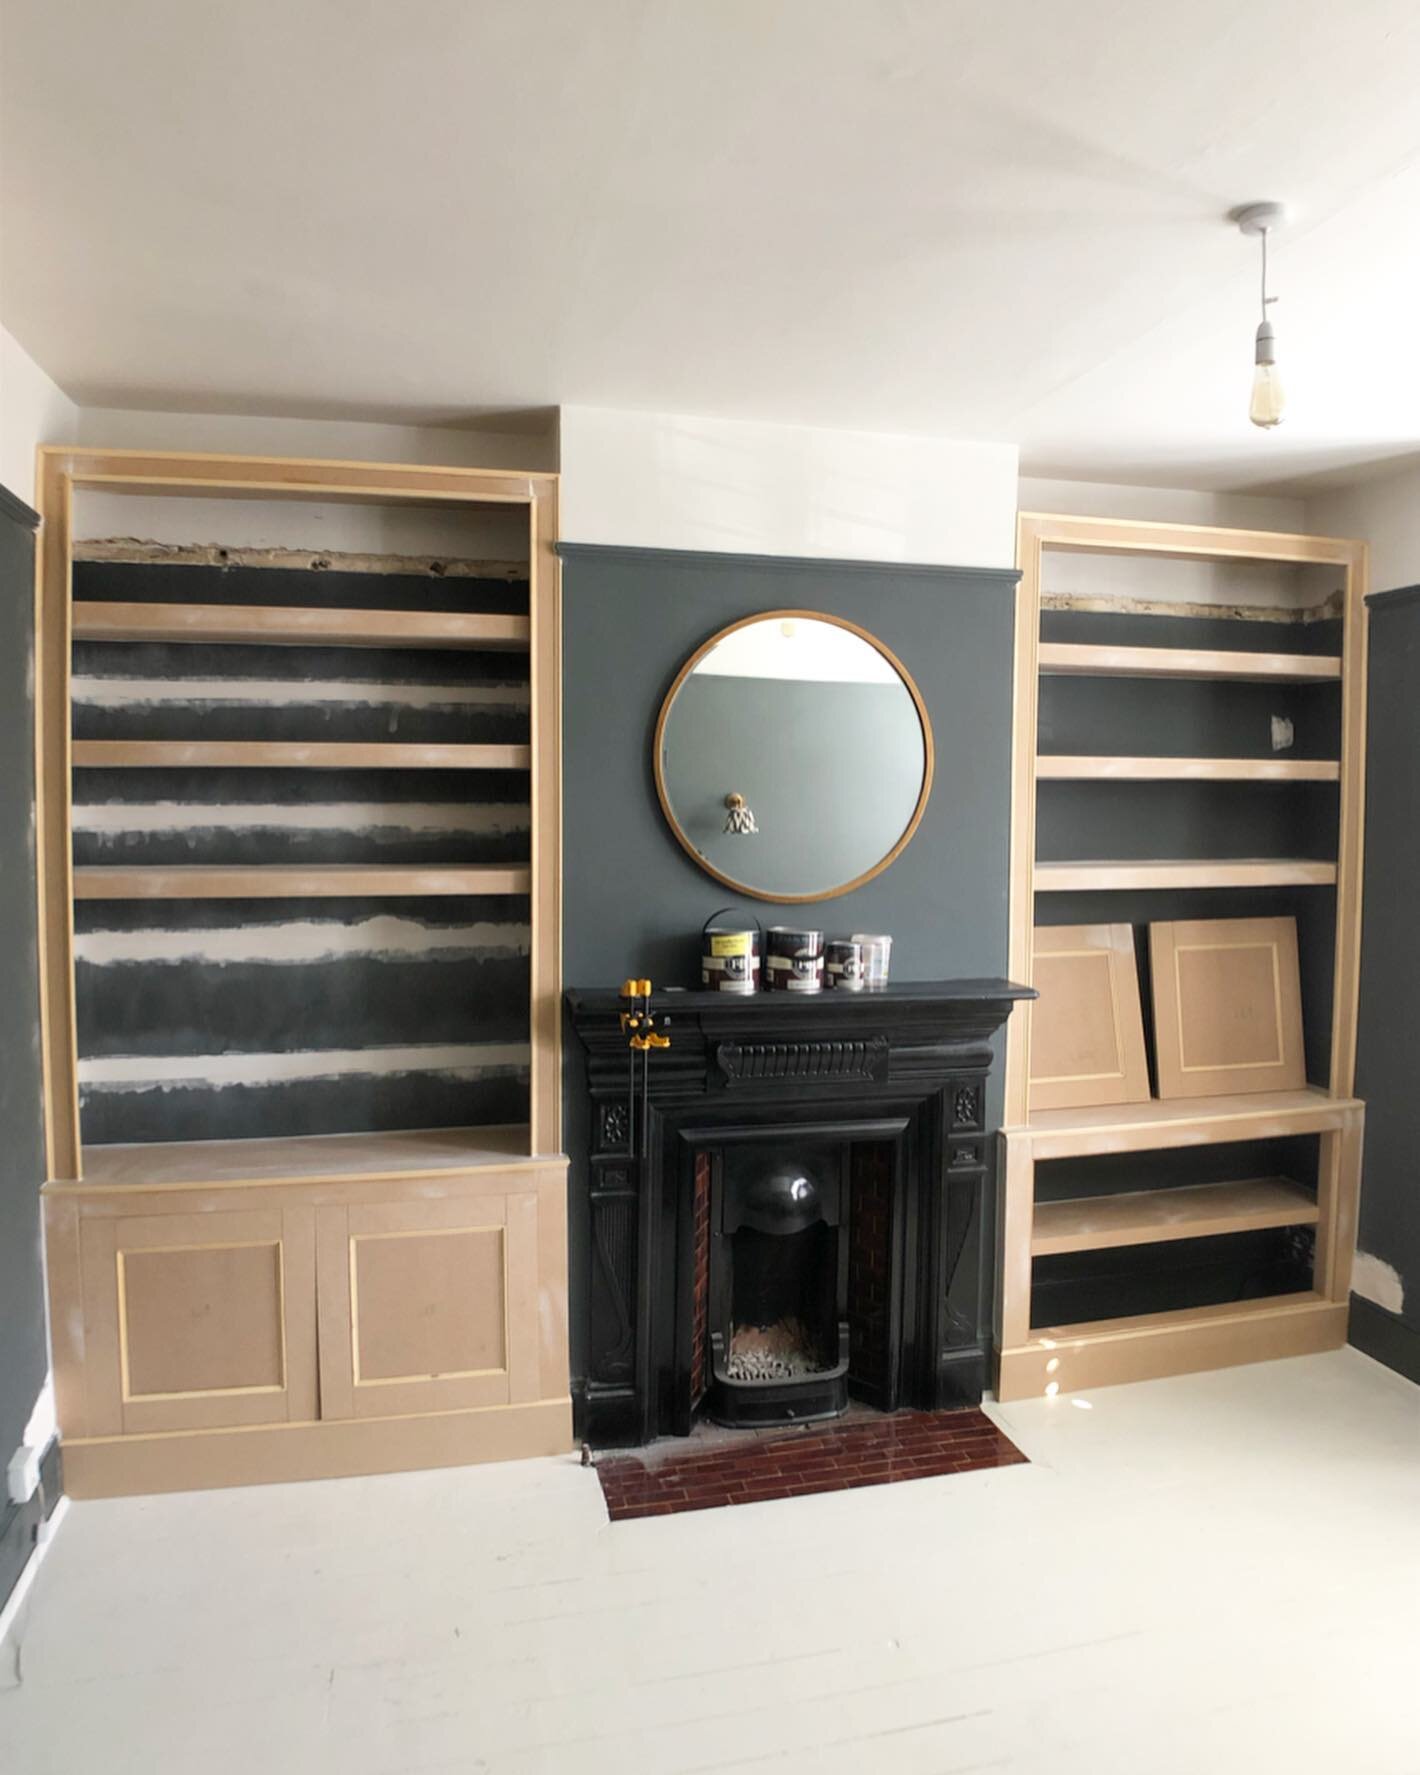 Some progress photos from a recent cabinet and shelving build in #Balham - soon to be finished in @farrowandball &lsquo;Down Pipe&rsquo; Estate Eggshell and then fitted with @philips Hue LED lights. Keep swiping to see the before photos. #RichardsonI